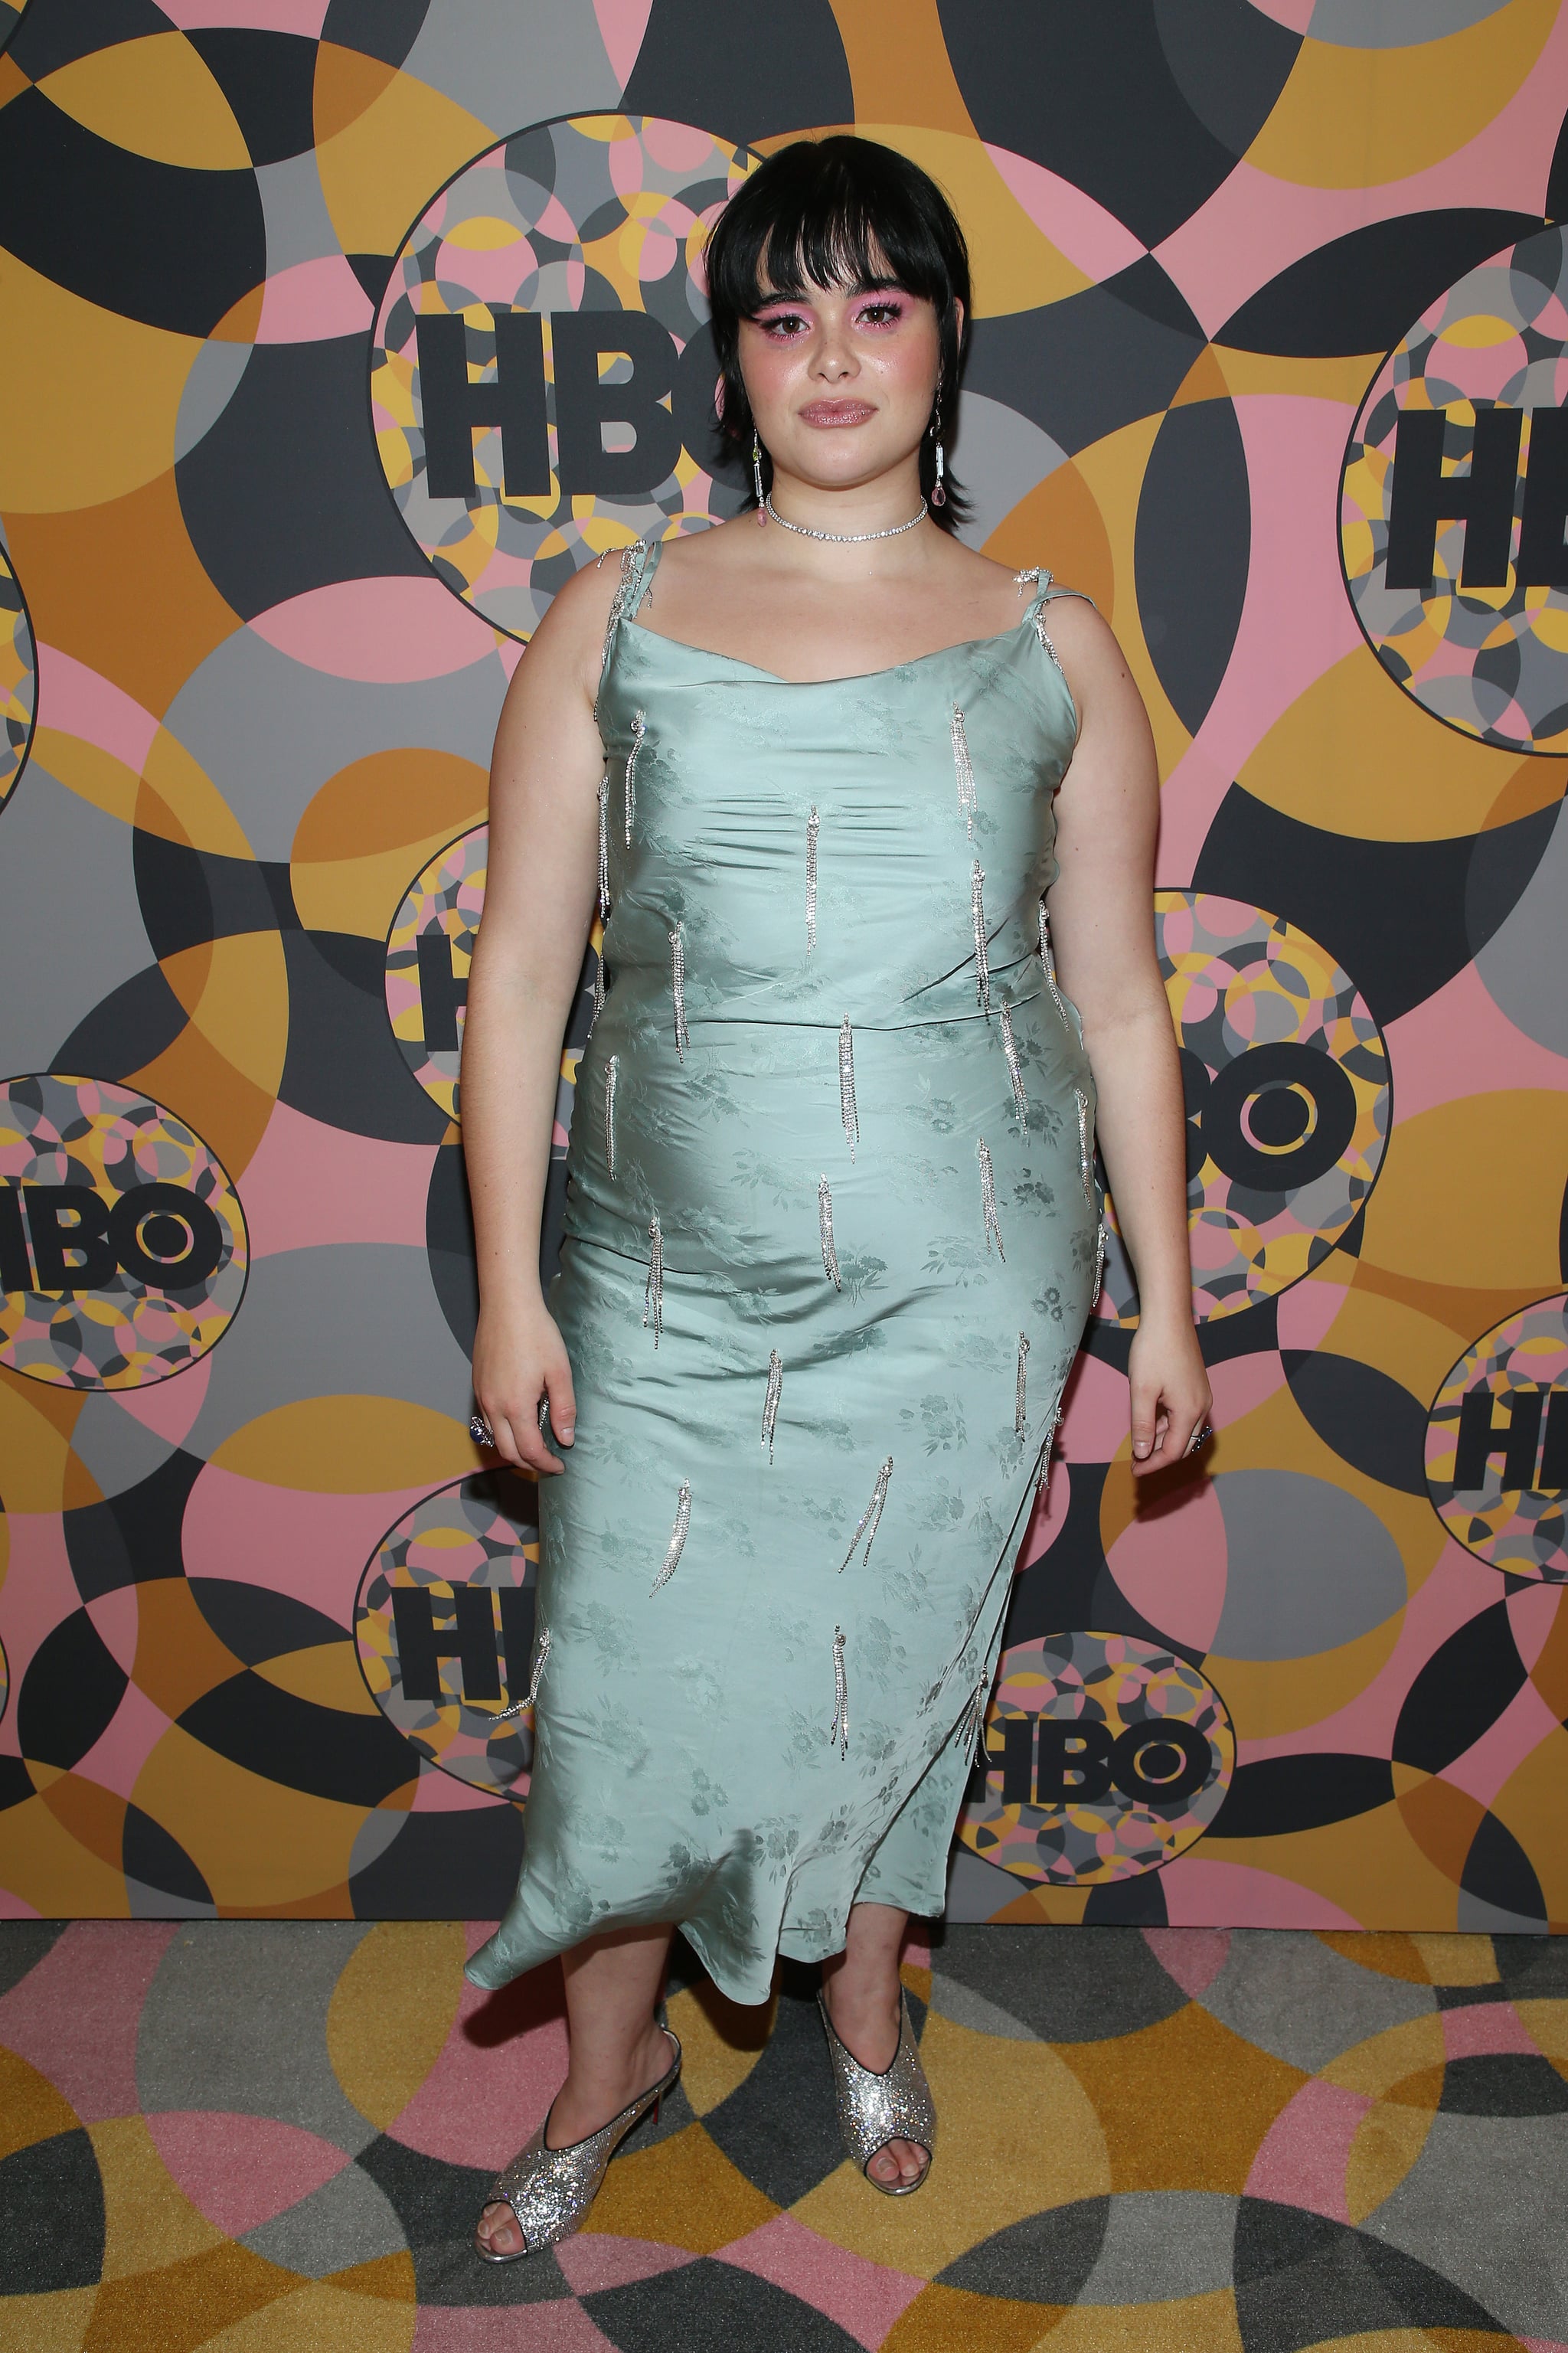 LOS ANGELES, CALIFORNIA - JANUARY 05: Barbie Ferreira attends HBO's Official Golden Globes After Party at Circa 55 Restaurant on January 05, 2020 in Los Angeles, California. (Photo by Phillip Faraone/Getty Images)